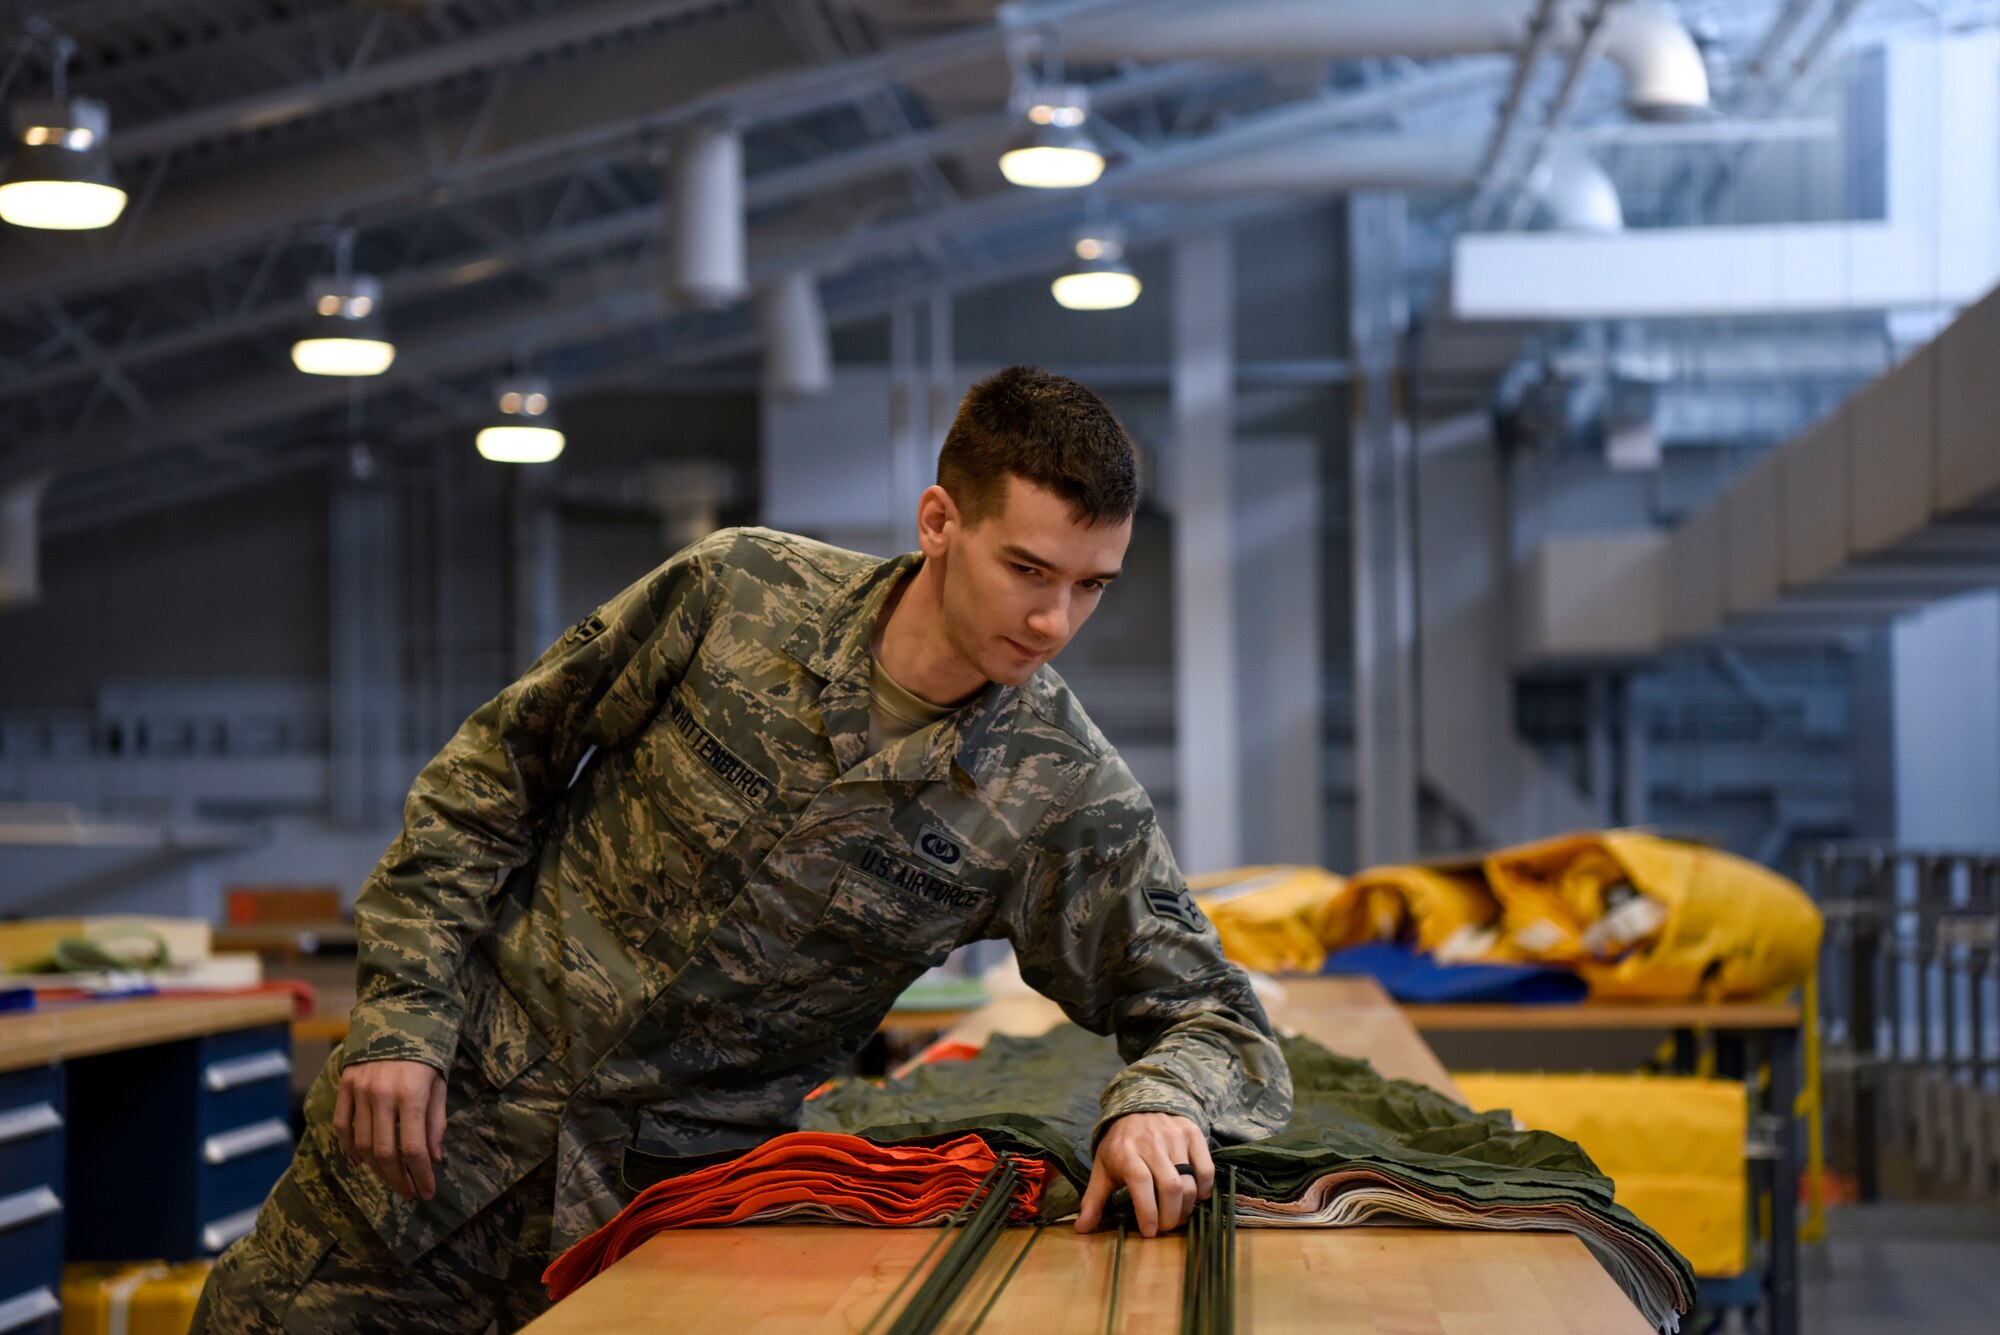 Airman 1st Class Cody Whittenburg, 436th Operations Support Squadron aircrew flight equipment apprentice, inspects and packs a parachute May 23, 2018, at Dover Air Force Base, Del. Parachutes are folded following a tedious process to ensure proper function during emergency aircraft egress. (U.S Air Force photo by Airman 1st Class Zoe M. Wockenfuss)